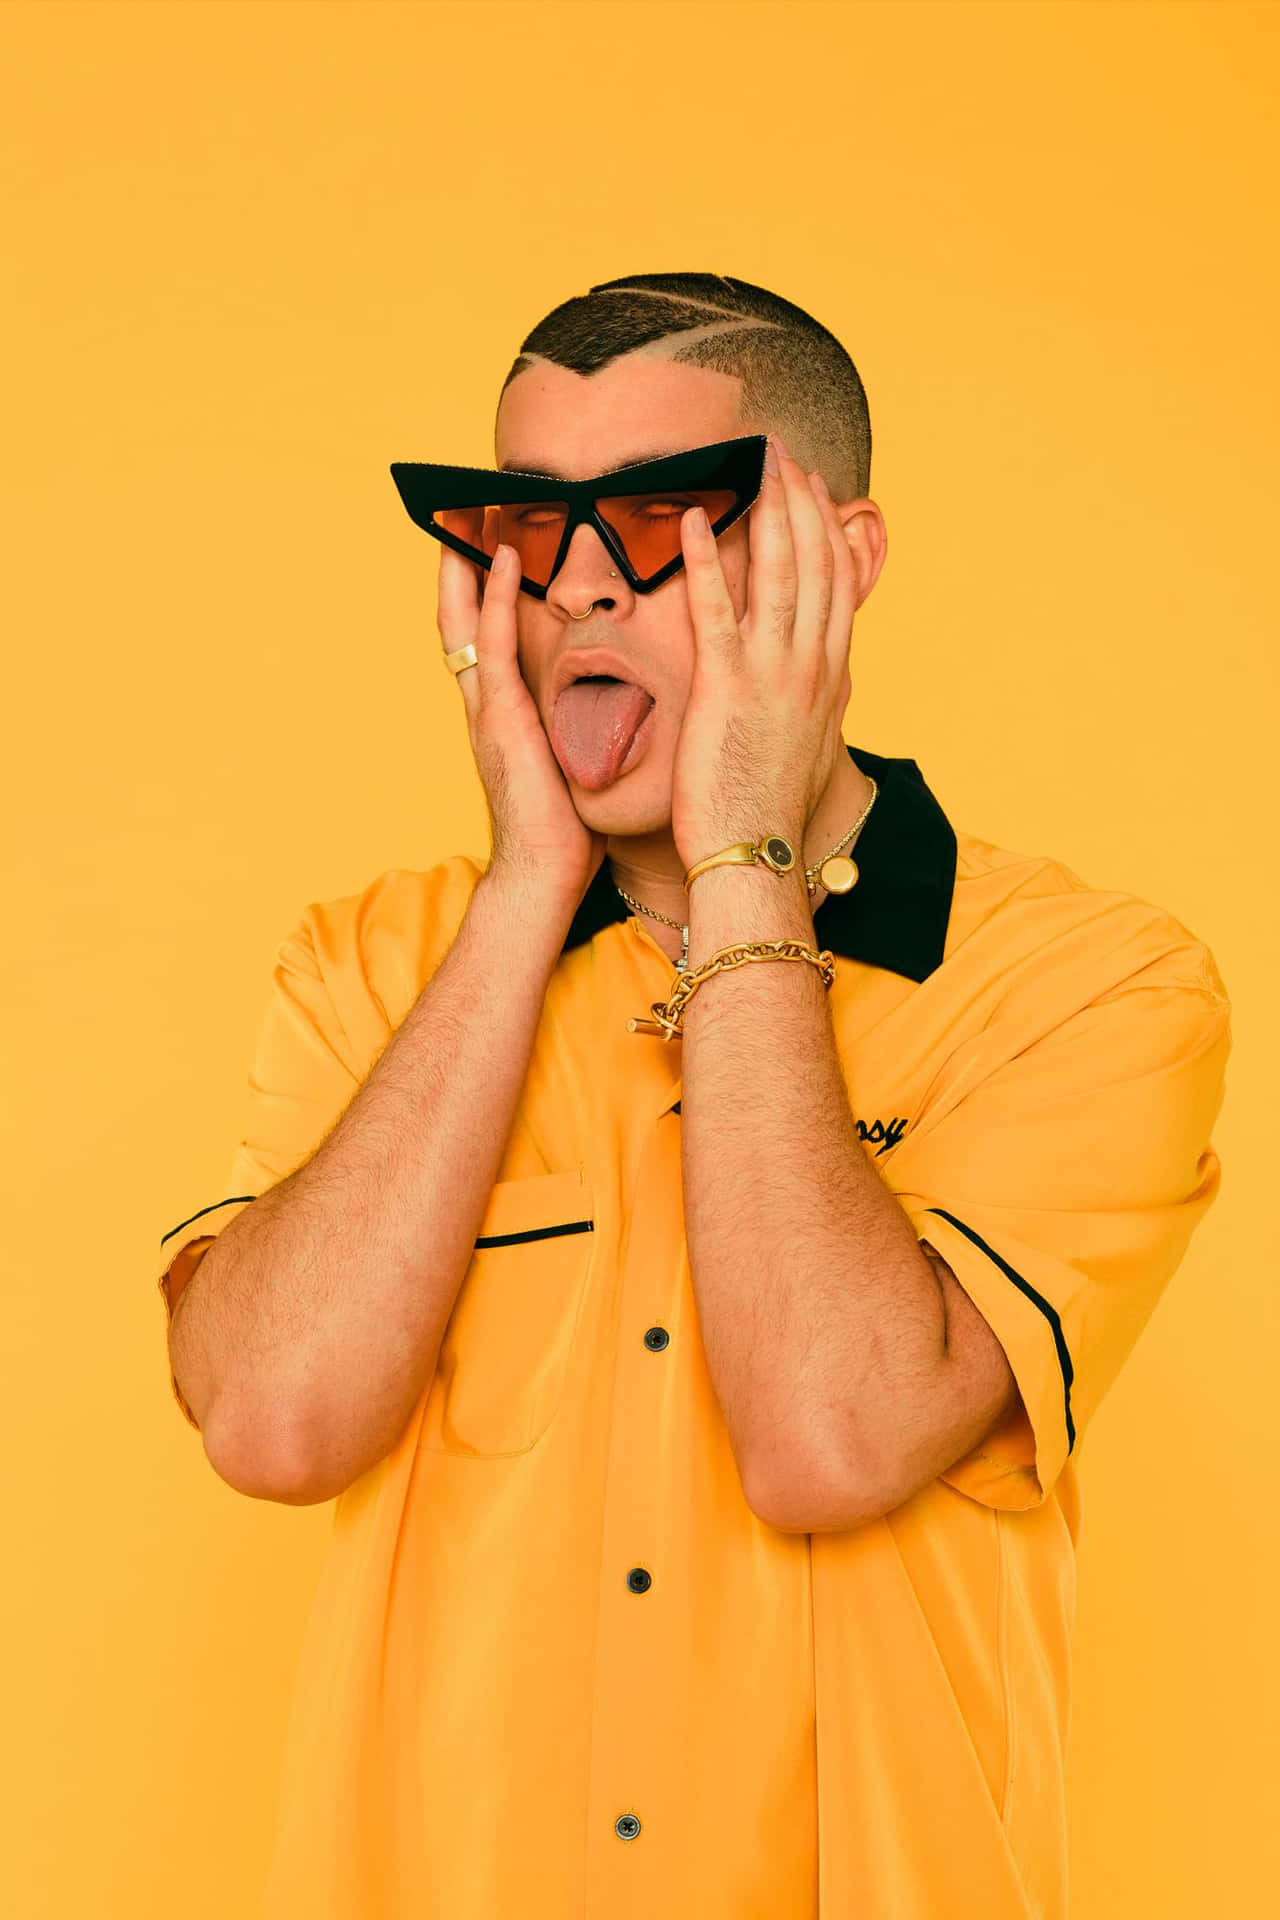 Bad Bunny showing off his iconic style.